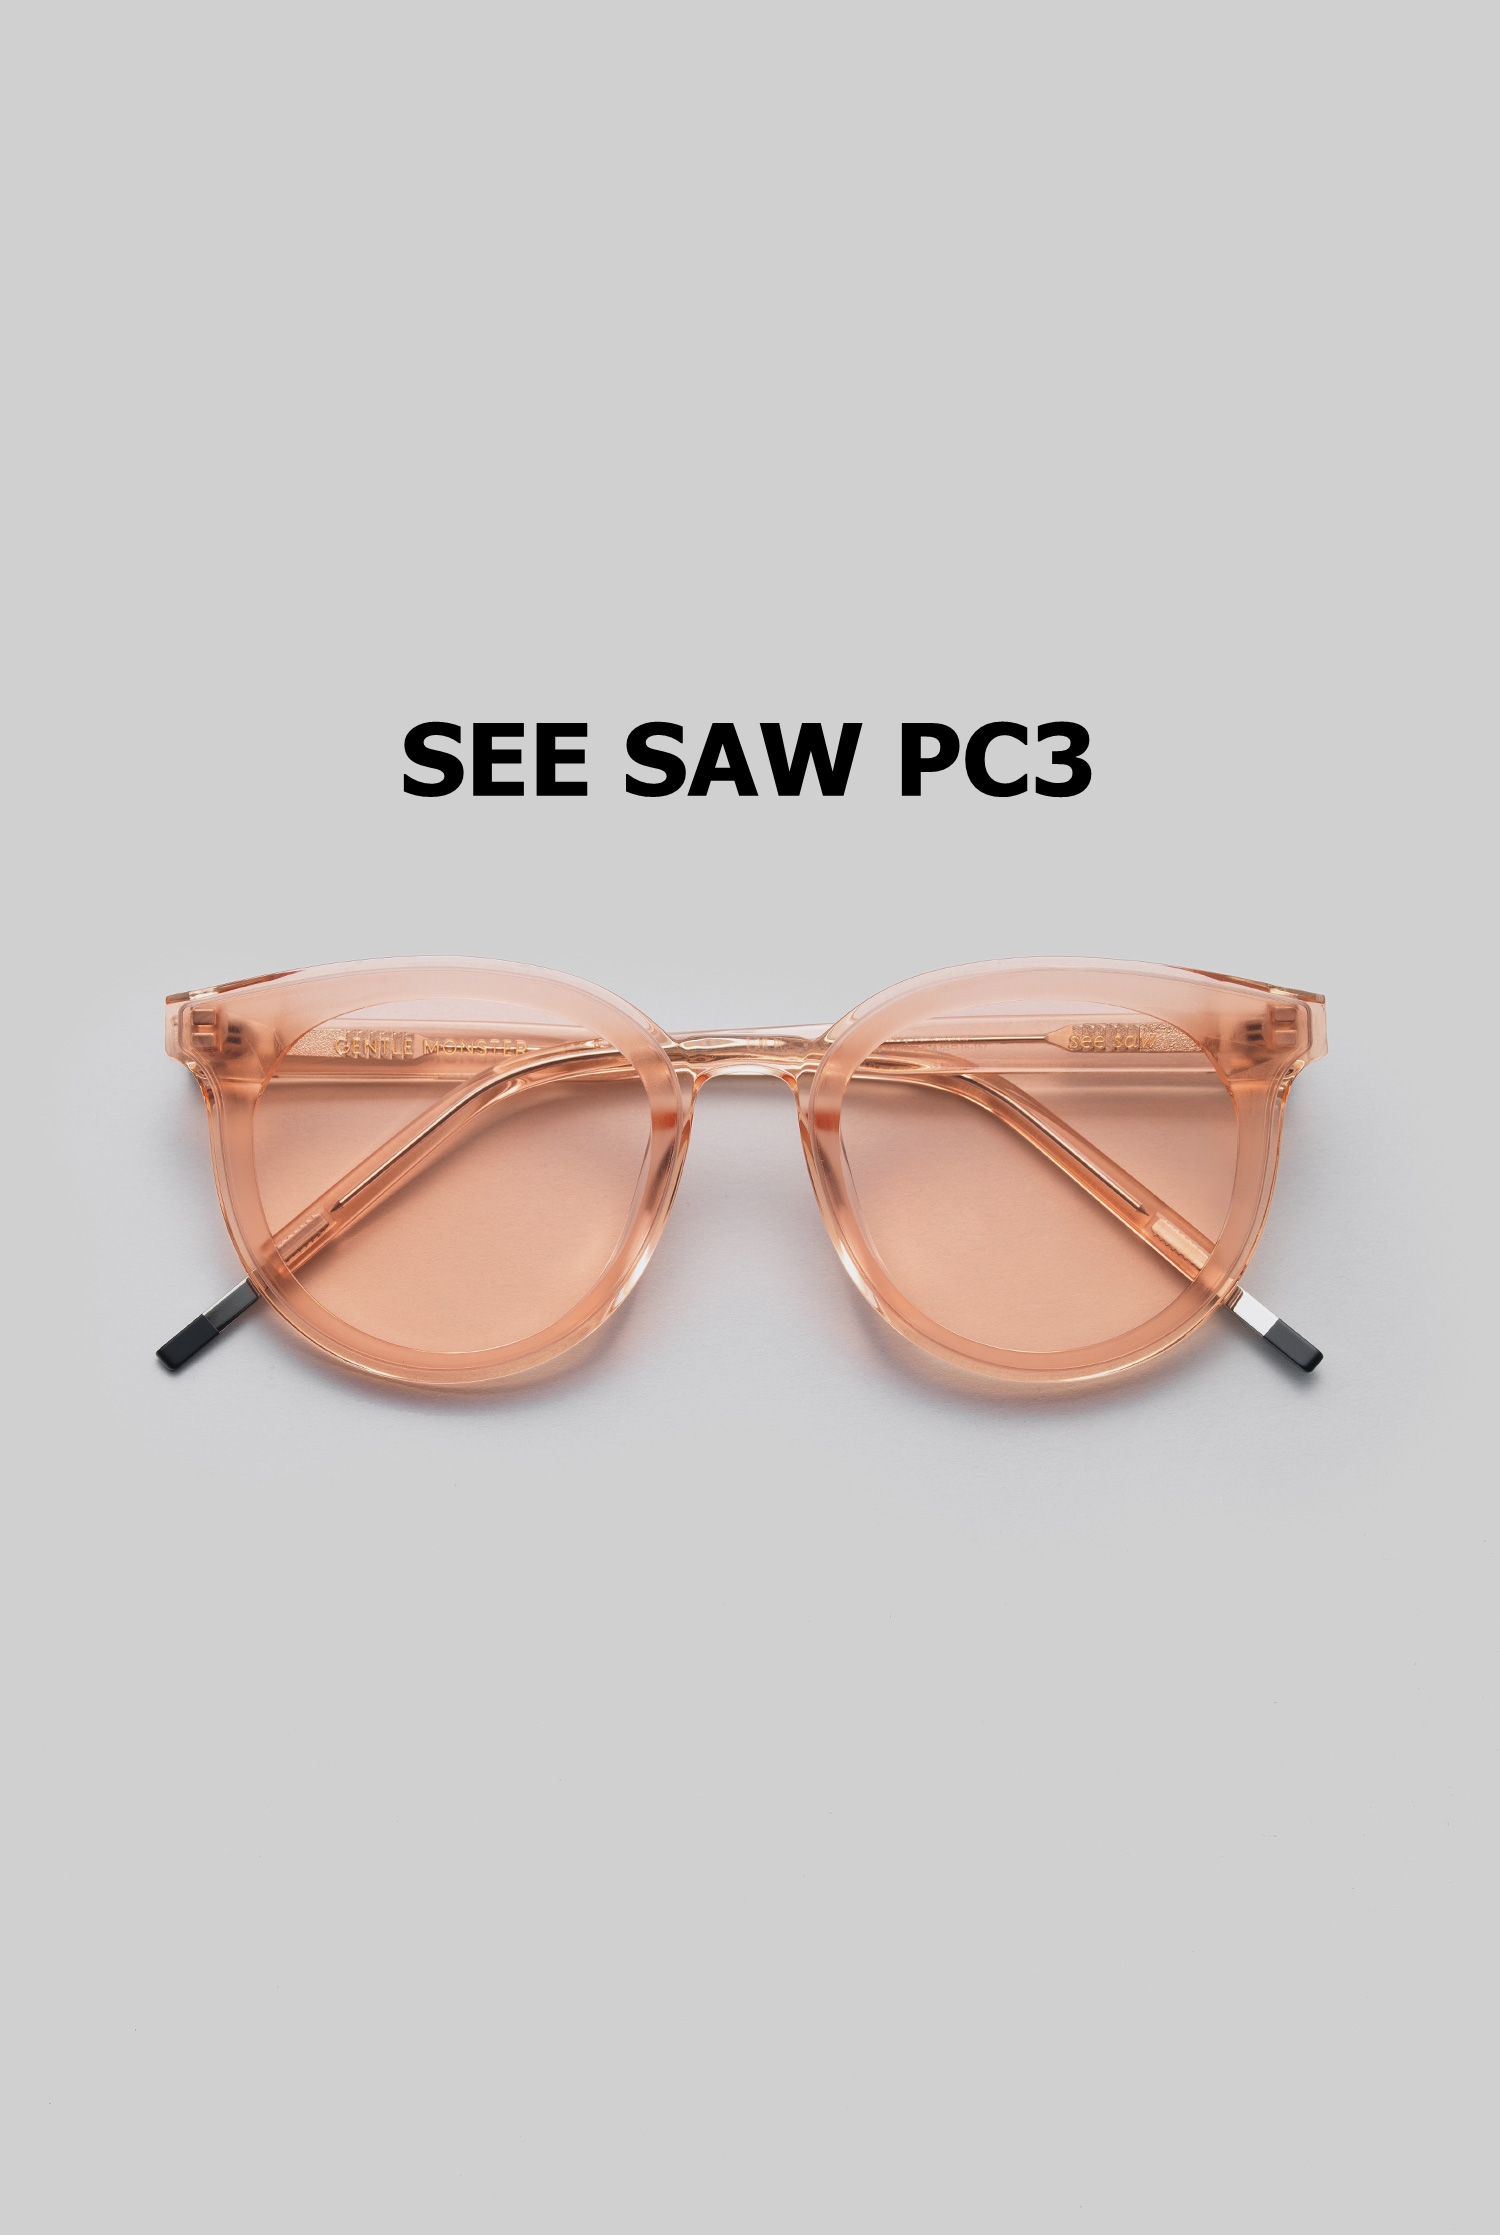 SEE SAW PC3